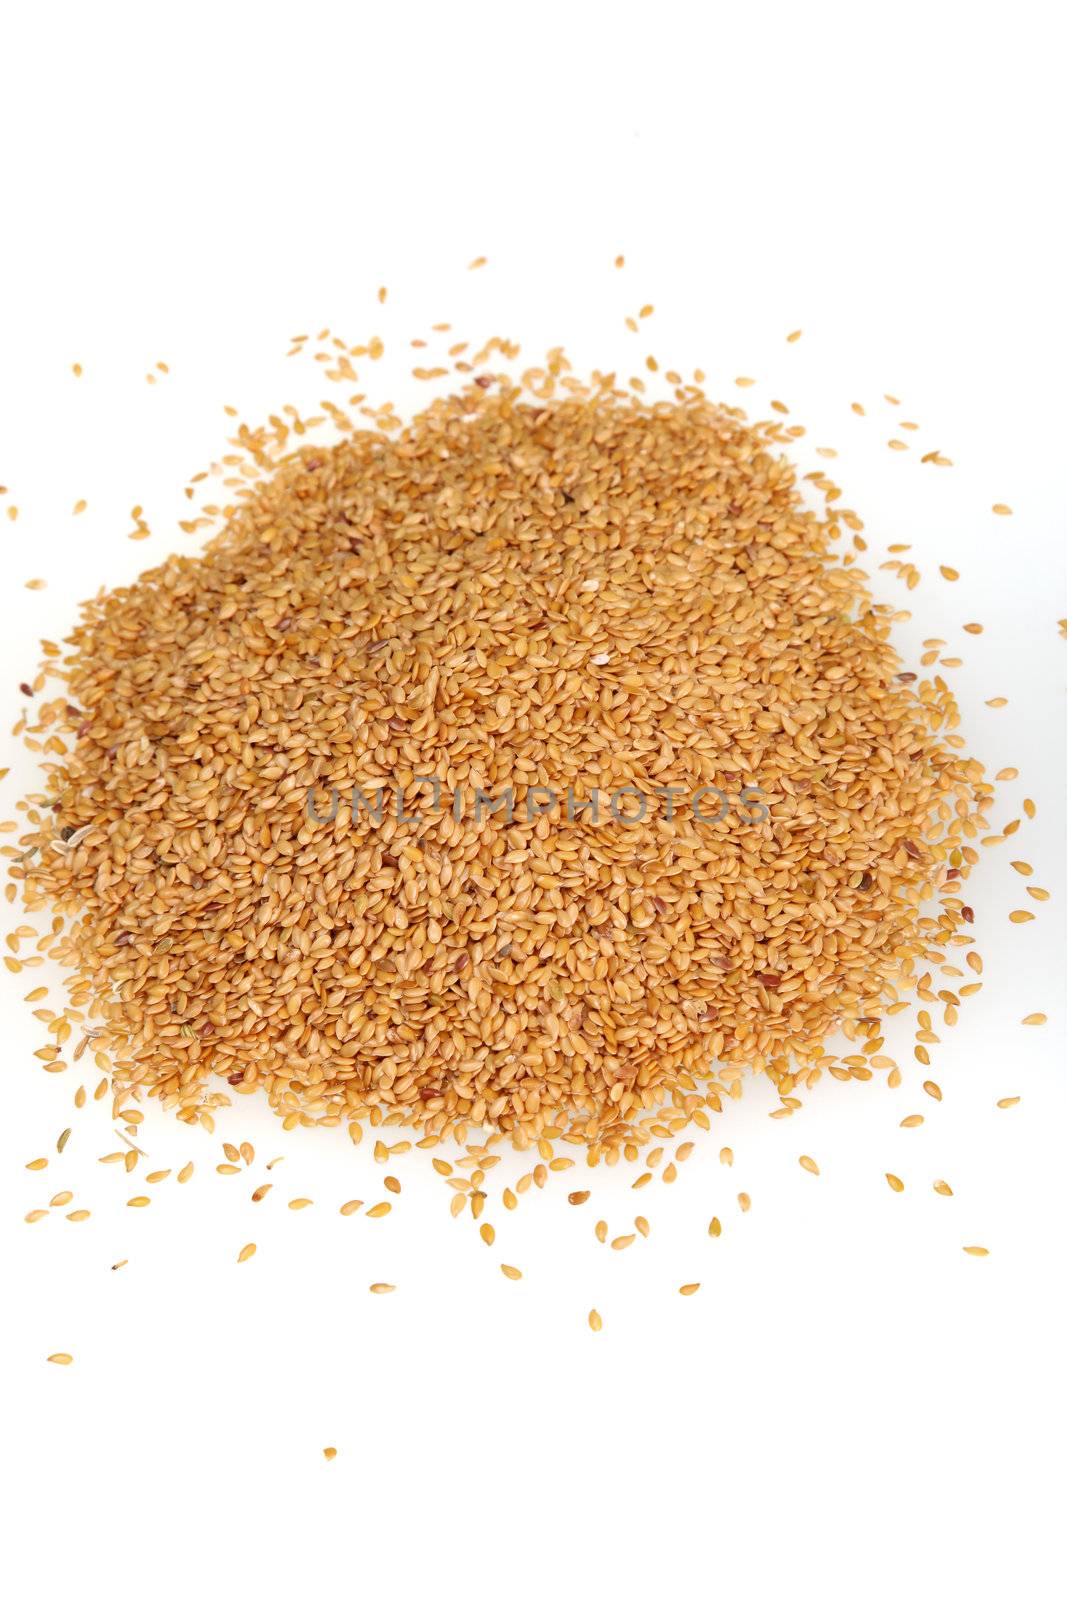 Image of linseed on white background. Image of yellow food grains on white background.